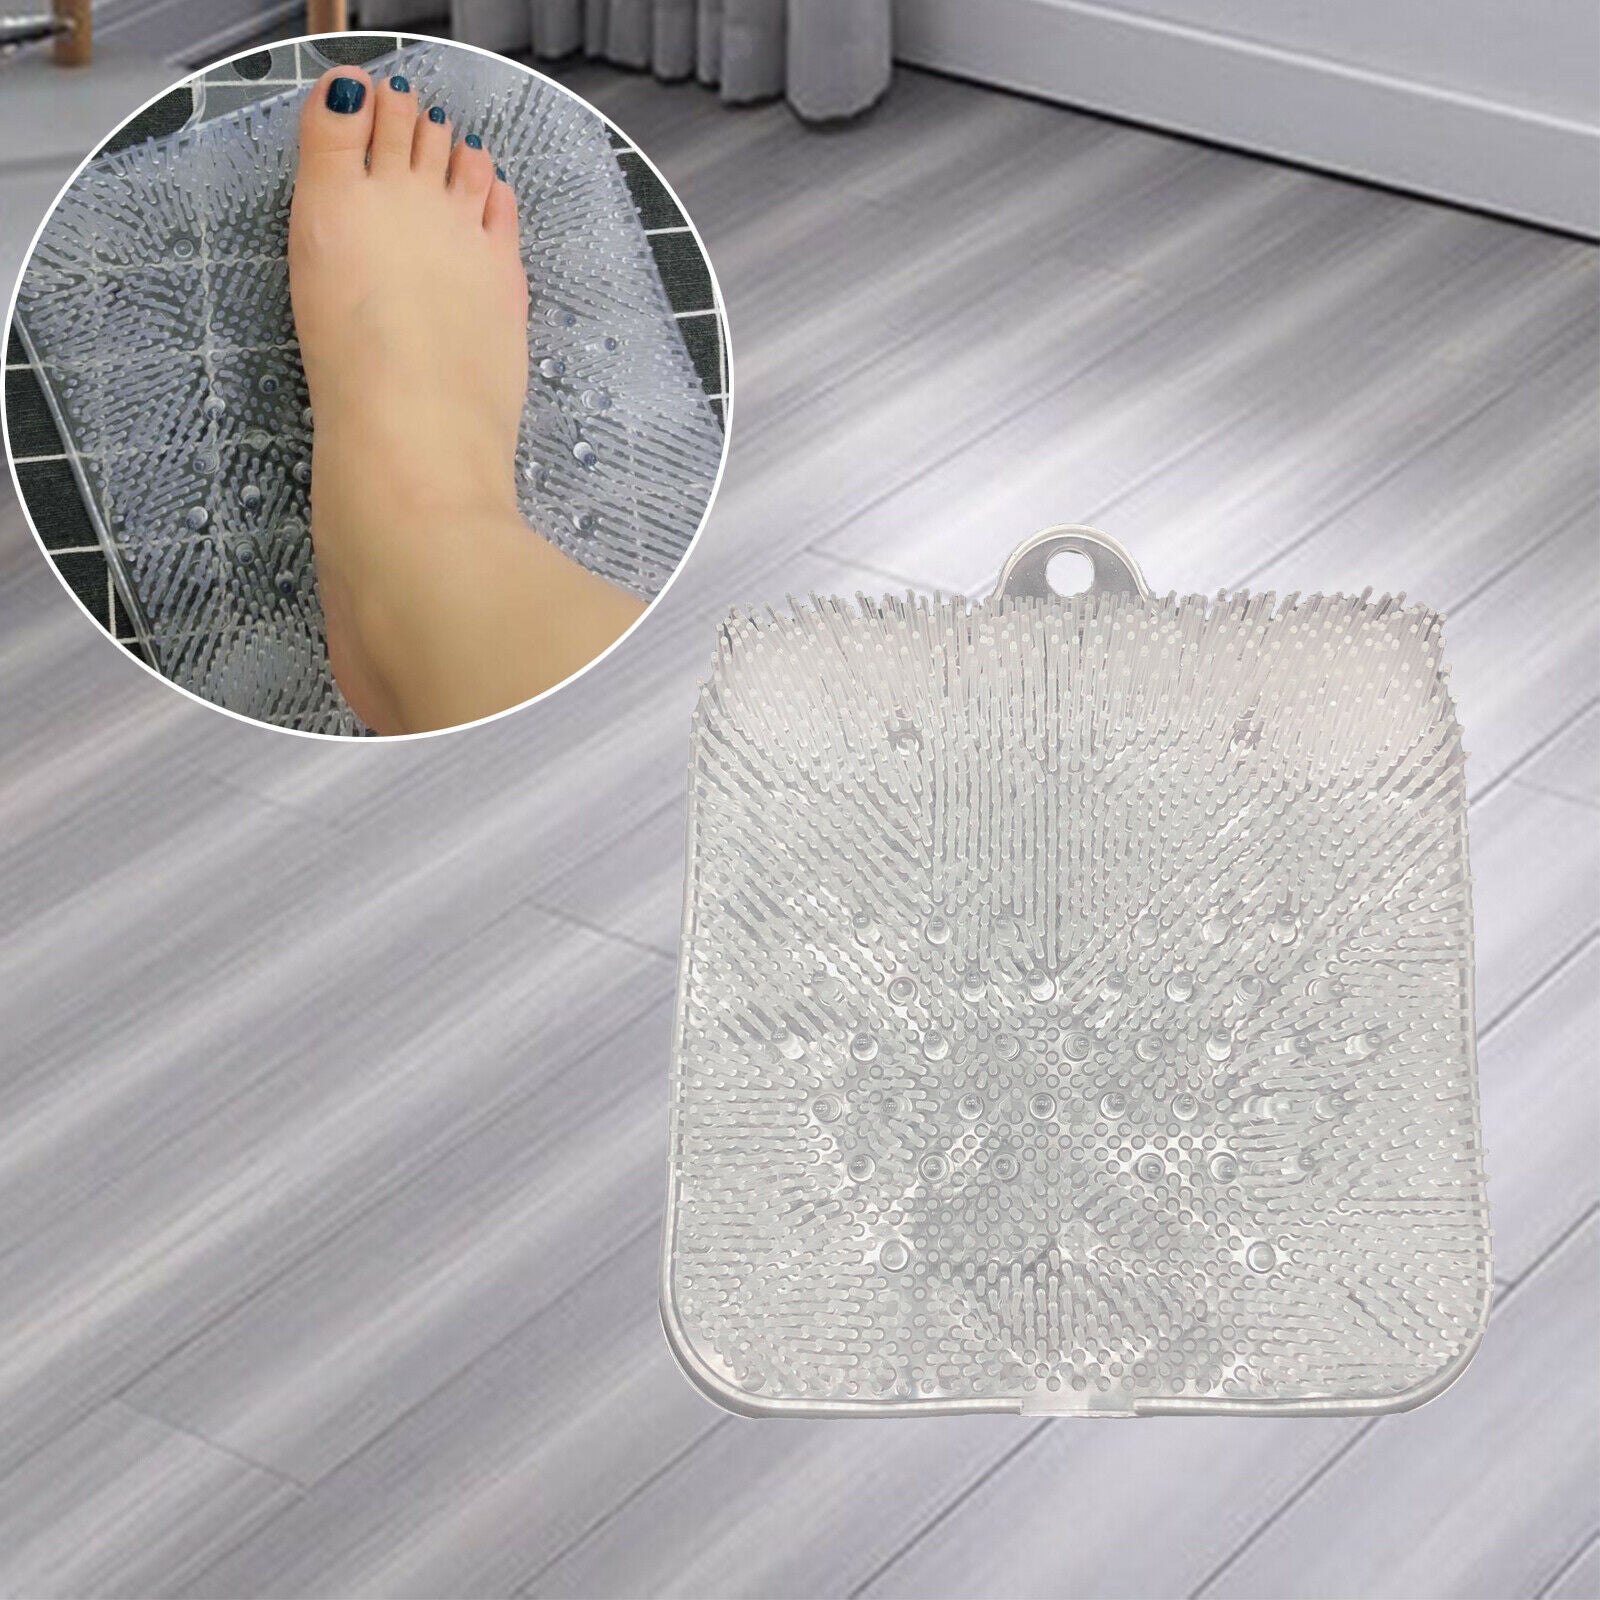 Massage Brushes Scrubber Beauty with Suction Cups Cushion for Bathtubs